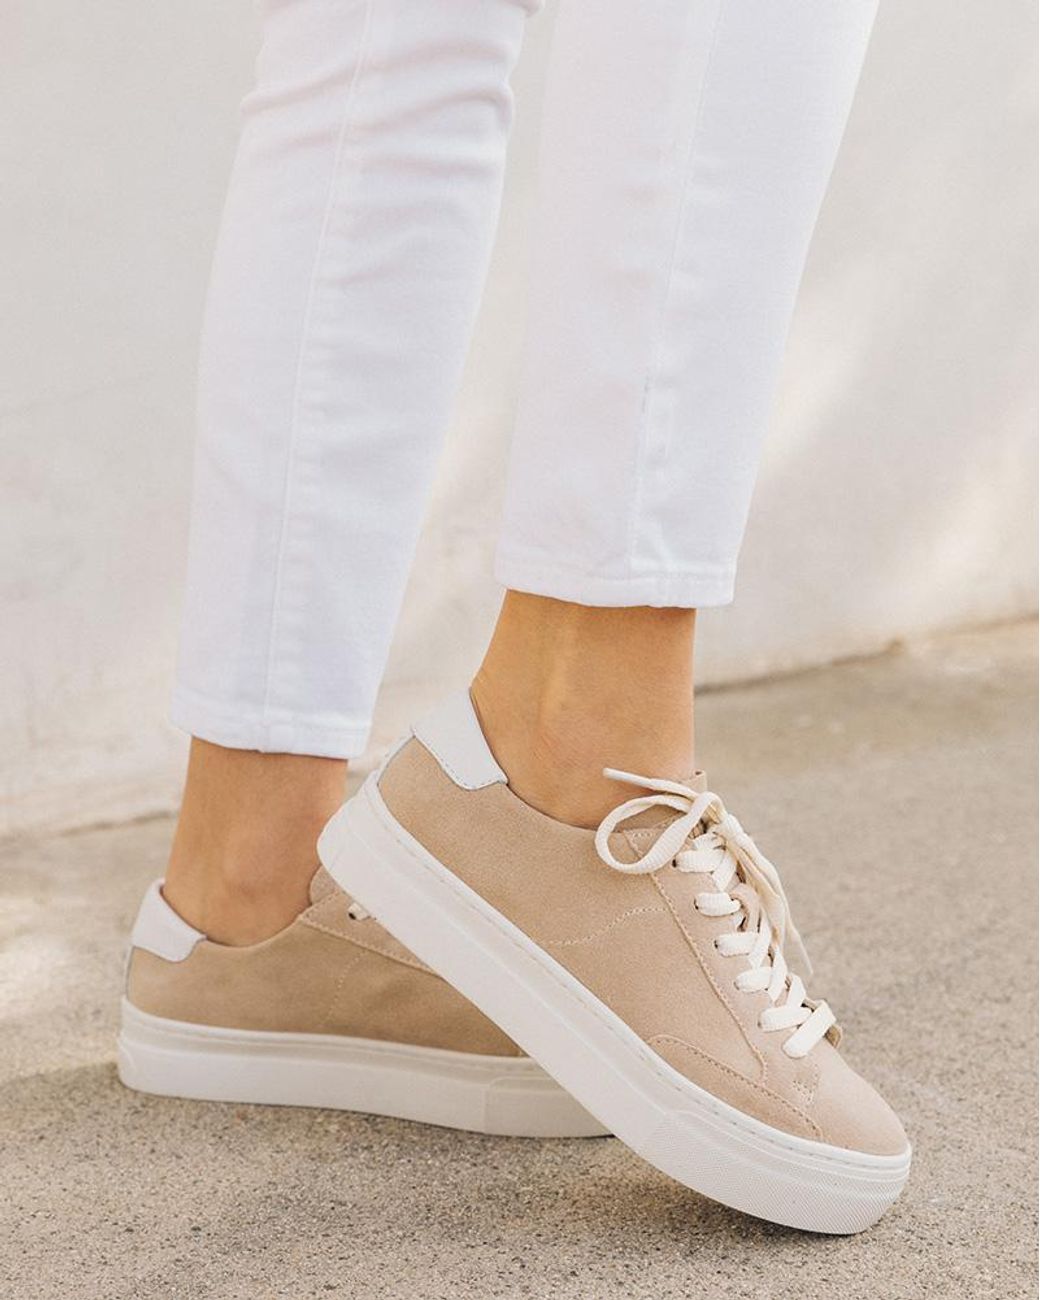 Soludos Leather Ibiza Platform Sneaker in Sand (Natural) - Lyst